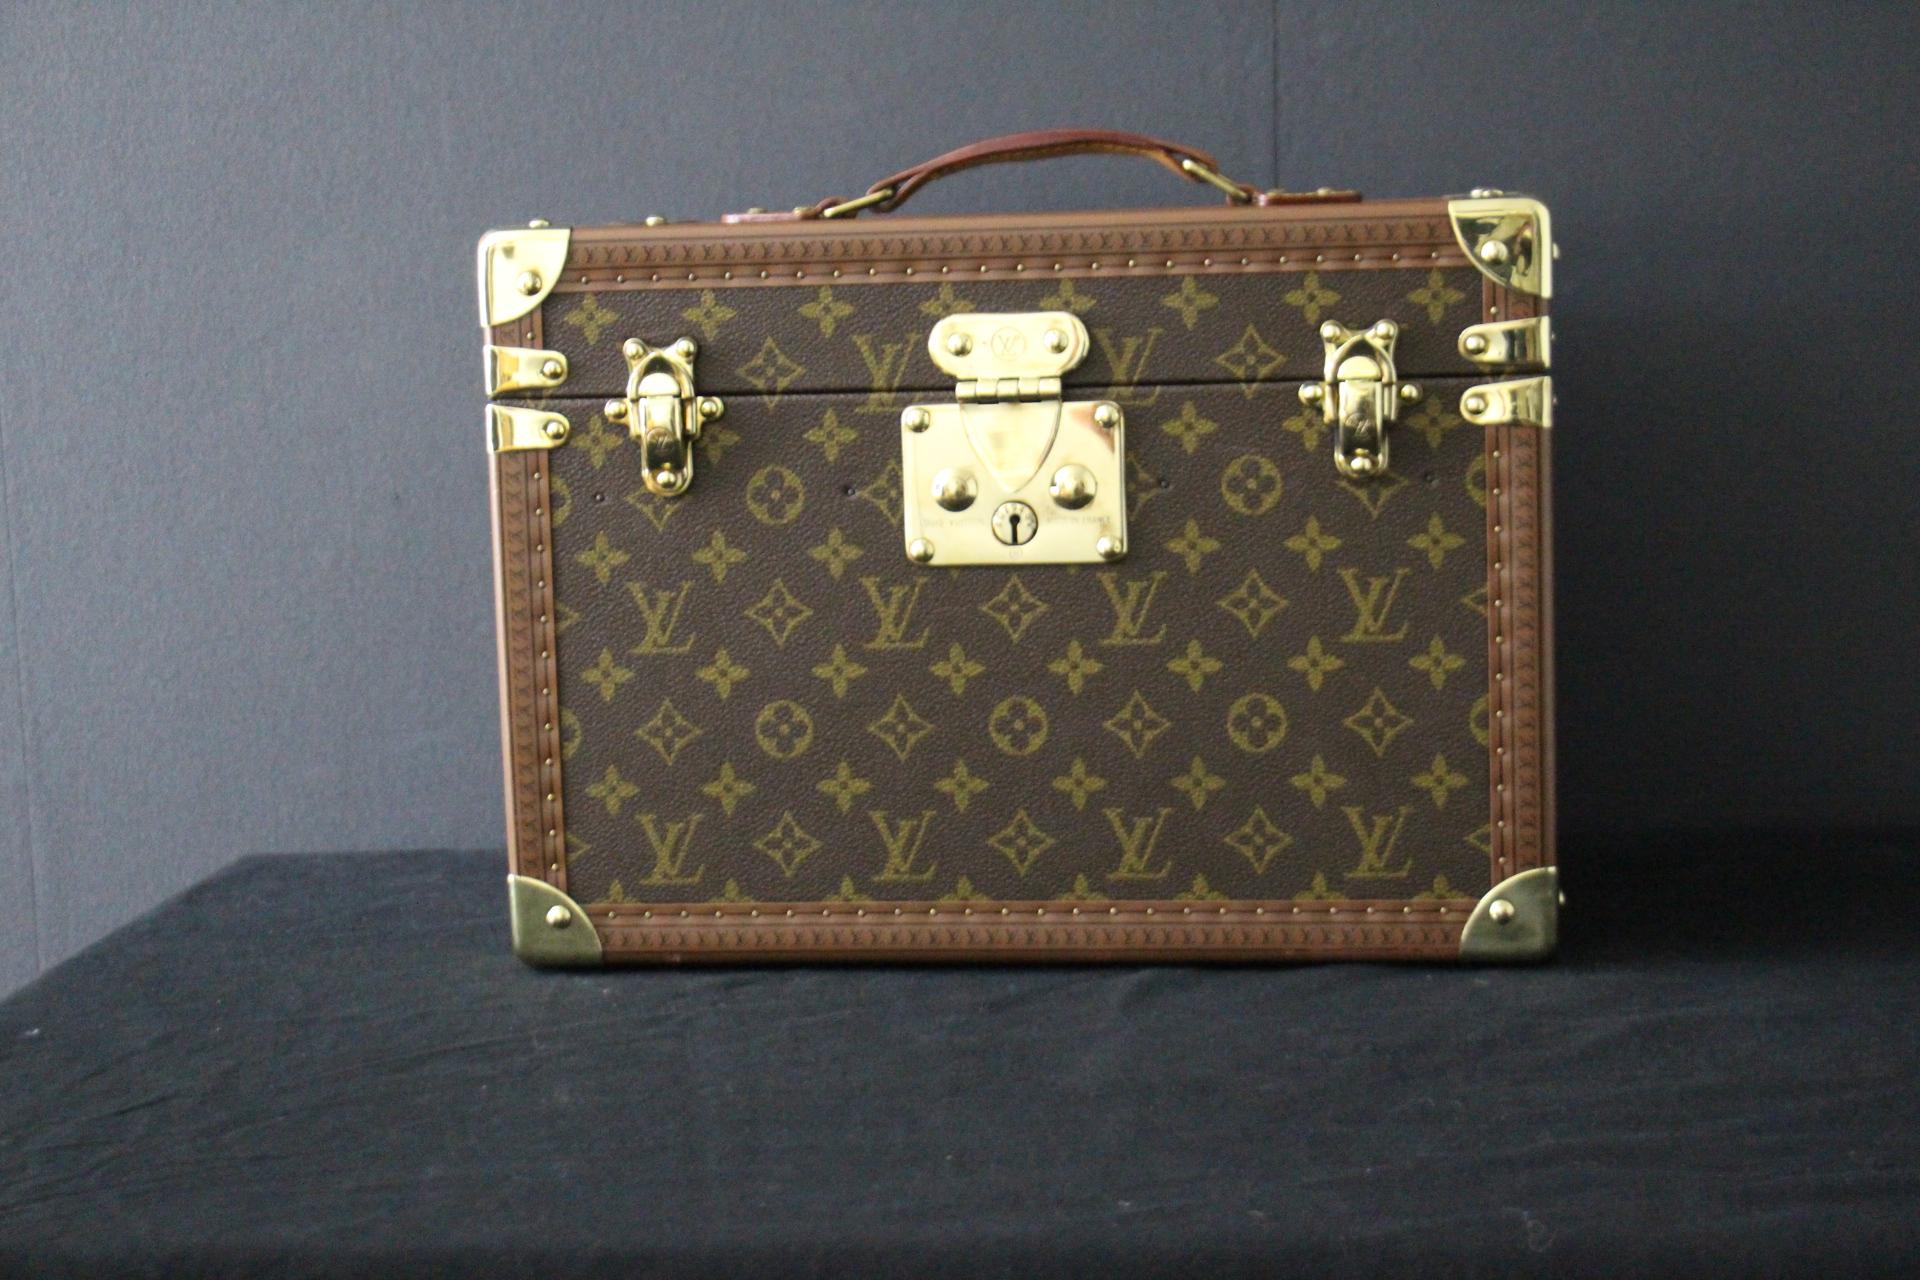 This Louis vuitton beauty case features monogram canvas and all brass fittings.Its main lock as well as its 2 latches are in solid brass and are stamped Louis Vuitton.
All studs are marked Louis Vuitton. Its large and comfortable top leather handle